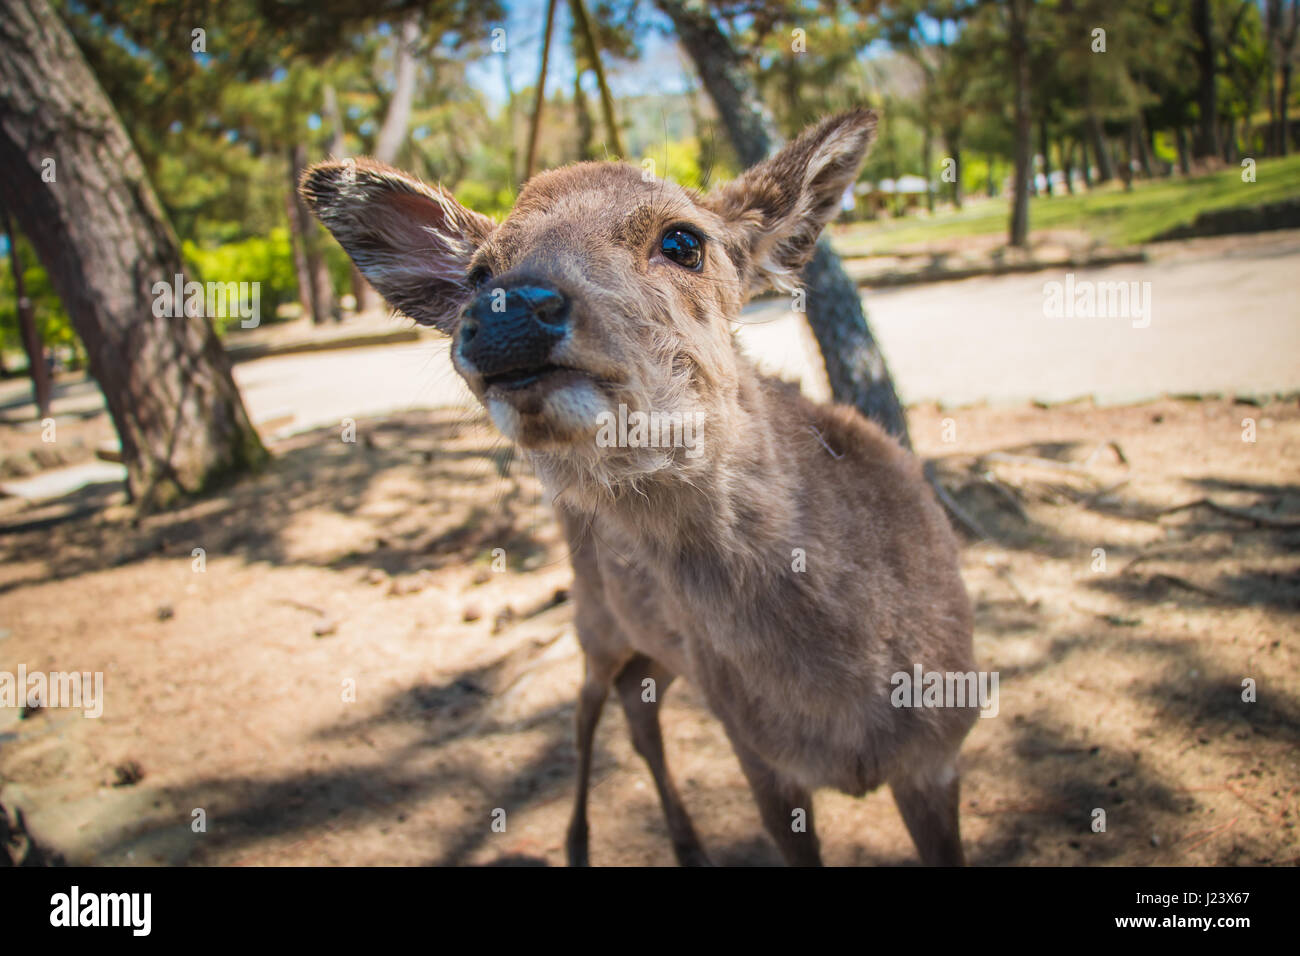 A close-up photo of a friendly deer in Nara, Japan Stock Photo